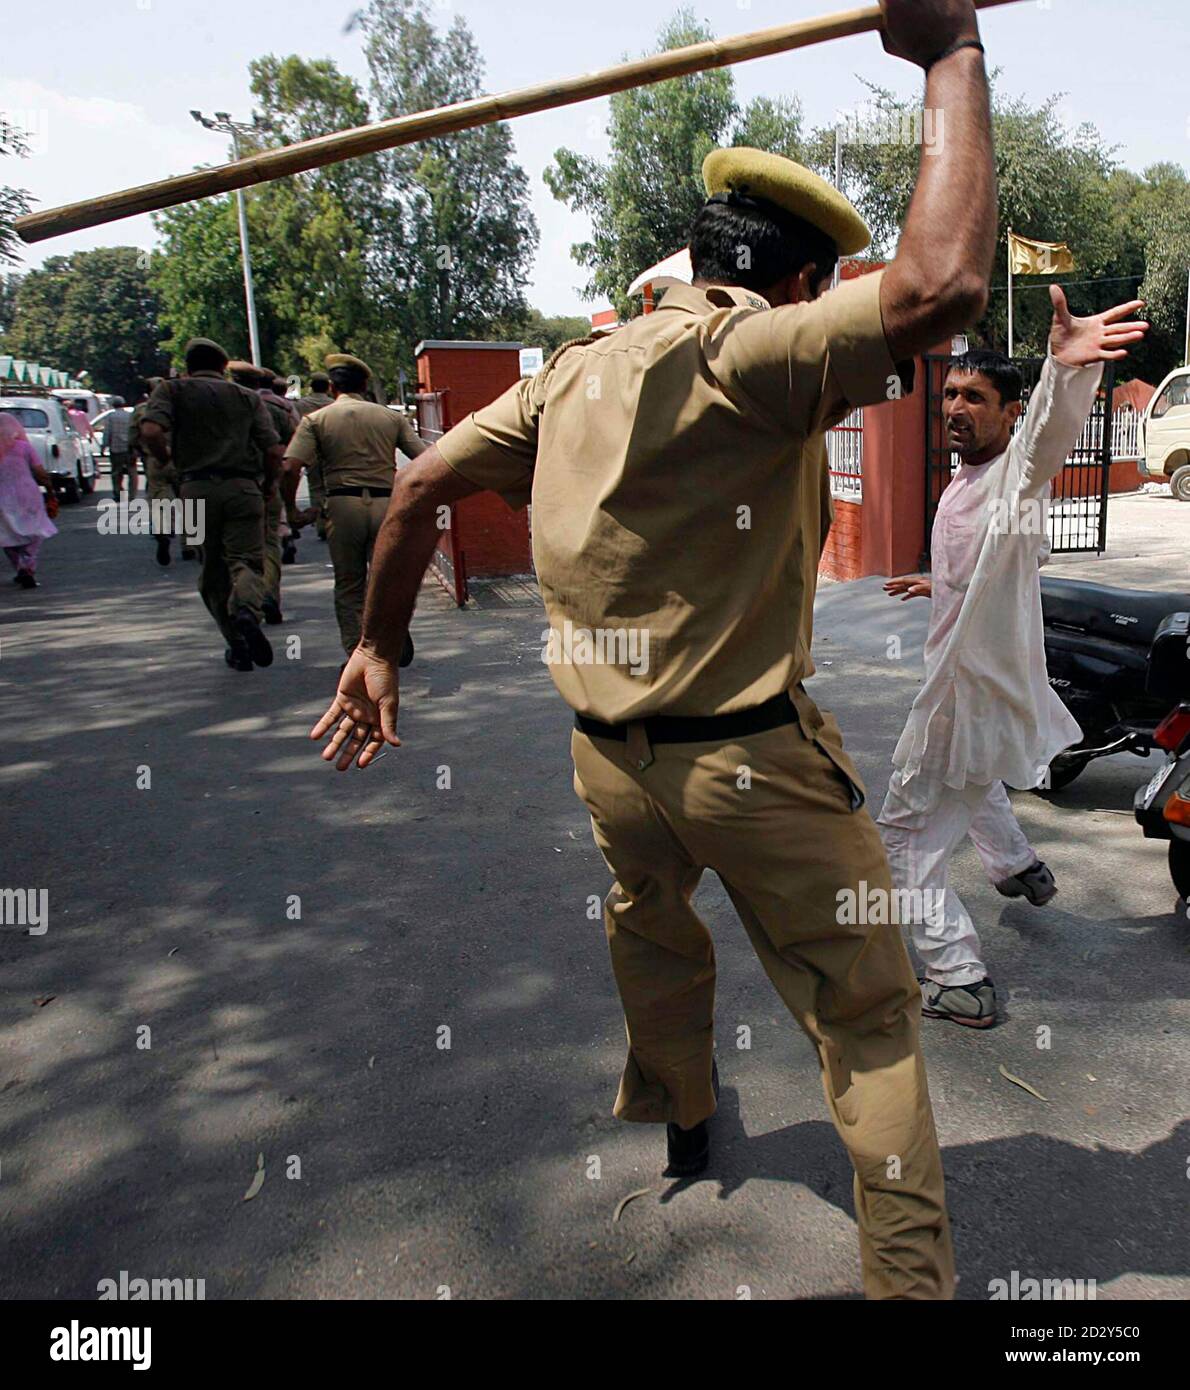 An Indian policeman wields a baton against a Pakistani refugee during a  protest in Jammu April 5, 2010. Dozens of Pakistani refugees, who  protesters said have been residing in Jammu since they